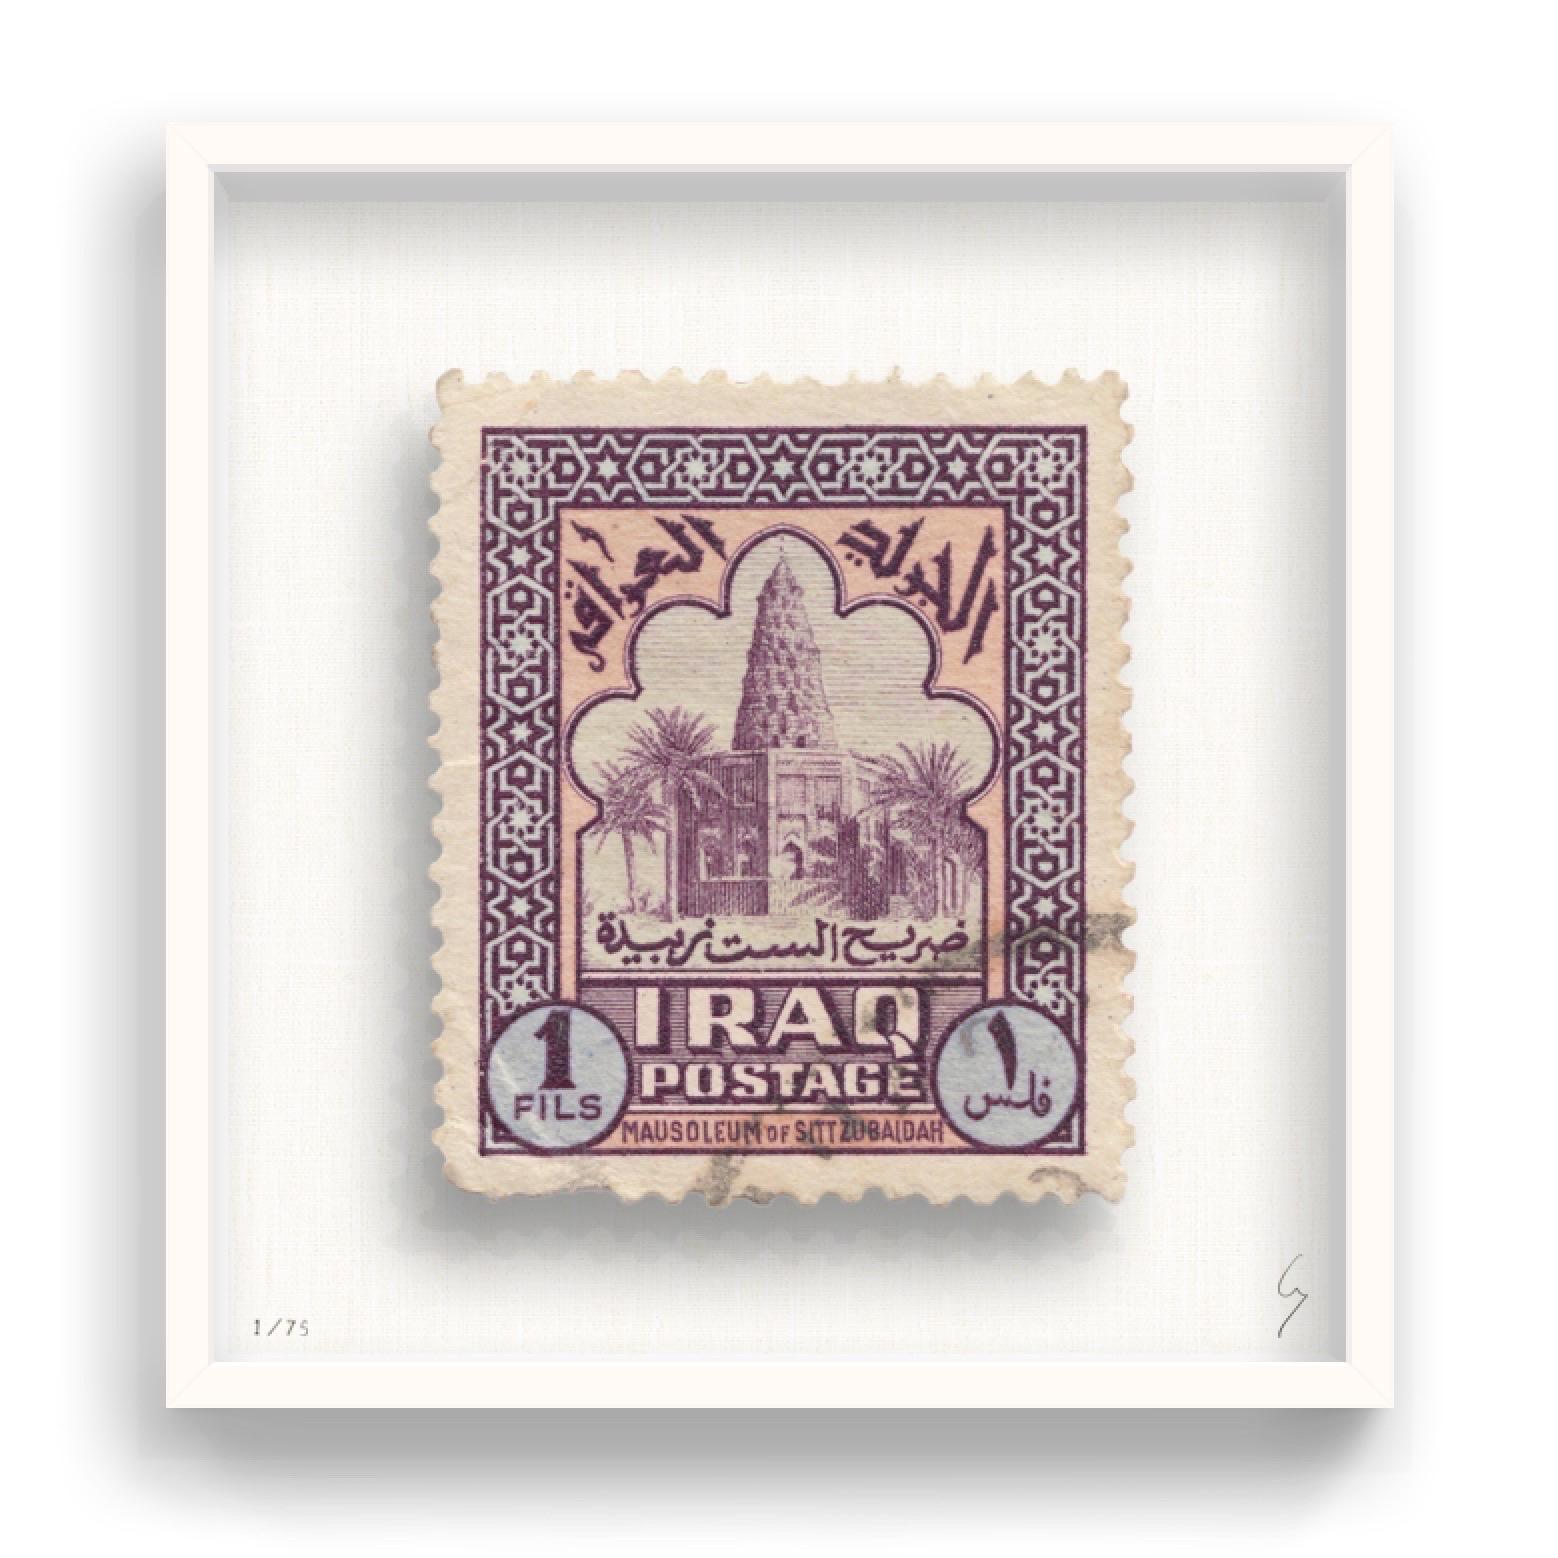 Guy Gee, Iraq (medium)

Hand-engraved print on 350gsm on G.F Smith card
53 x 56cm (20 4/5 x 22 2/5 in)
Frame included 
Edition of 75 

Each artwork by Guy had been digitally reimagined from an original postage stamp. Cut out and finished by hand,